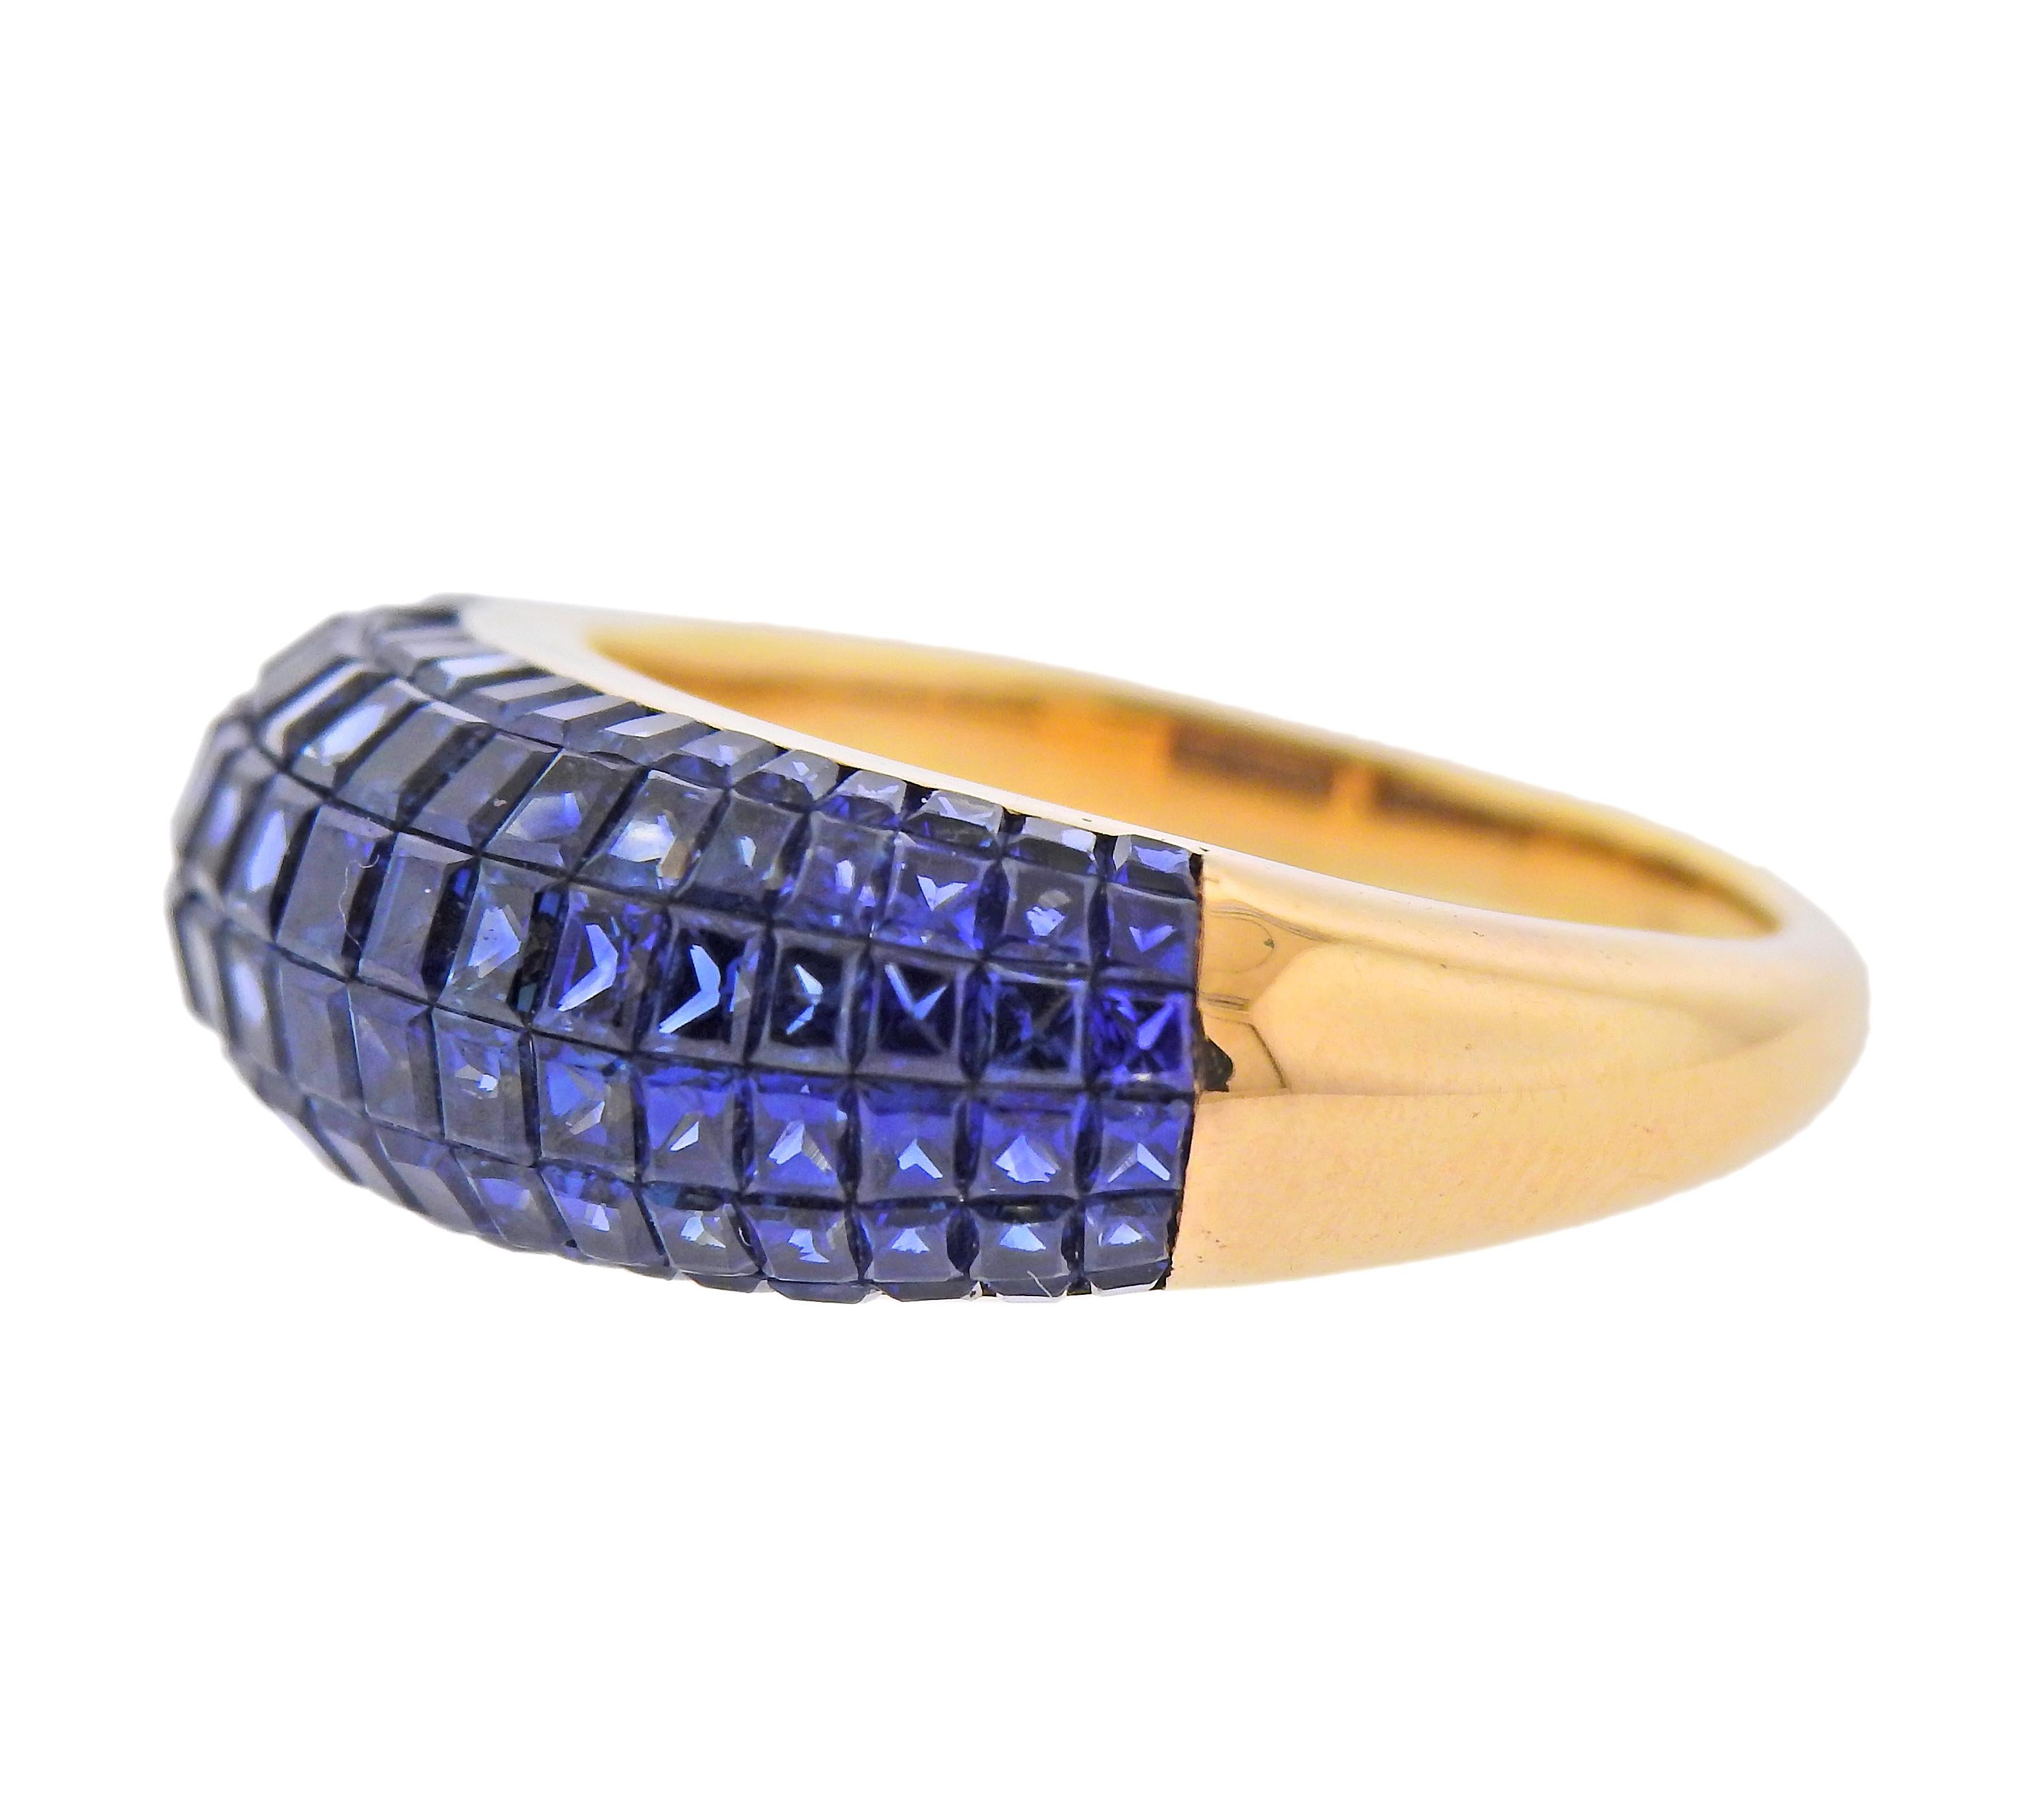 18k gold ring, with invisible set blue sapphires. Ring size - 6.5, ring top is 8mm wide. Weight - 7.7 grams. 